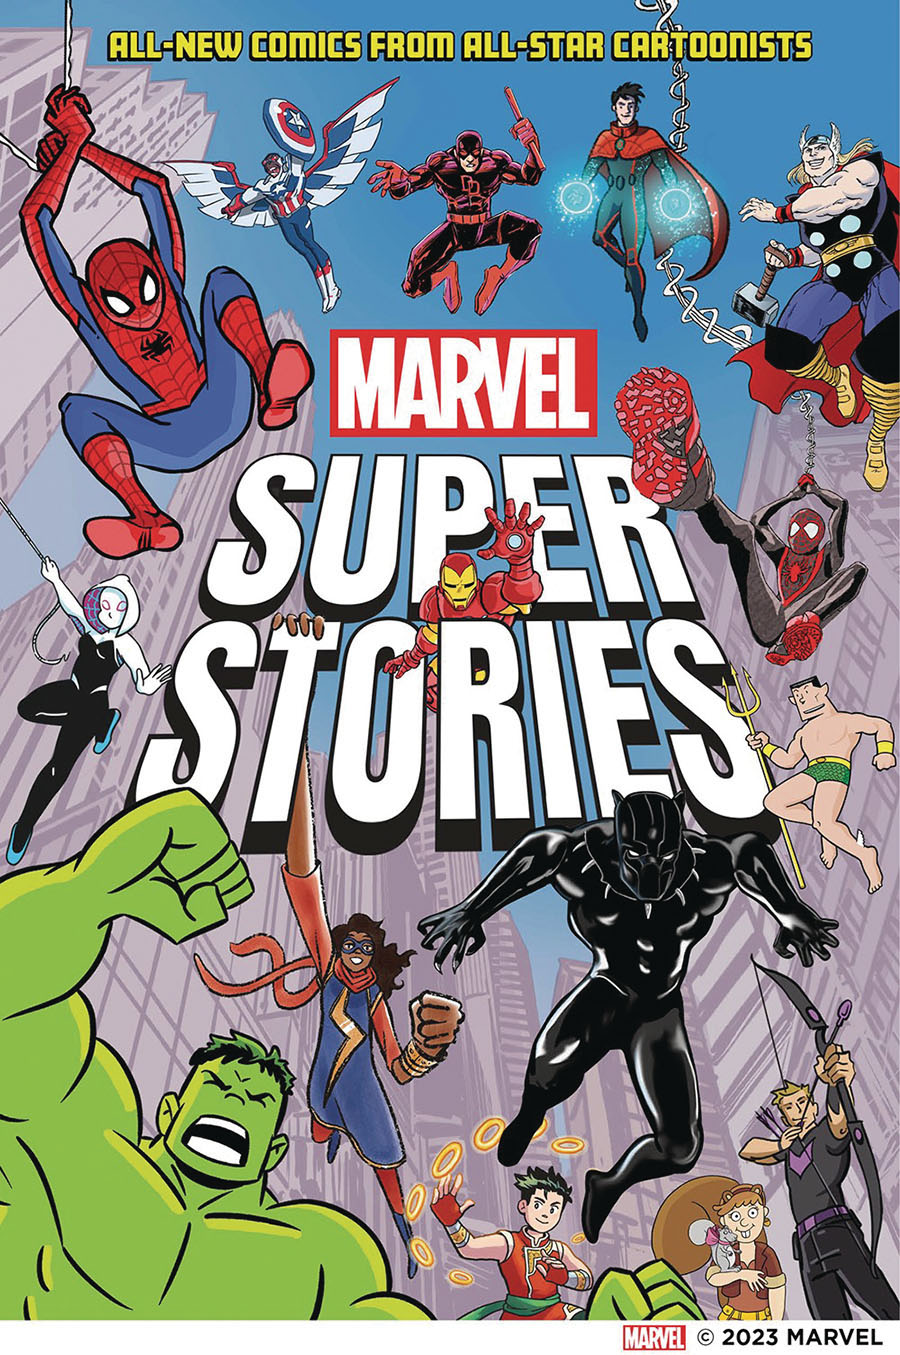 Marvel Super Stories All-New Comics From All-Star Cartoonists HC